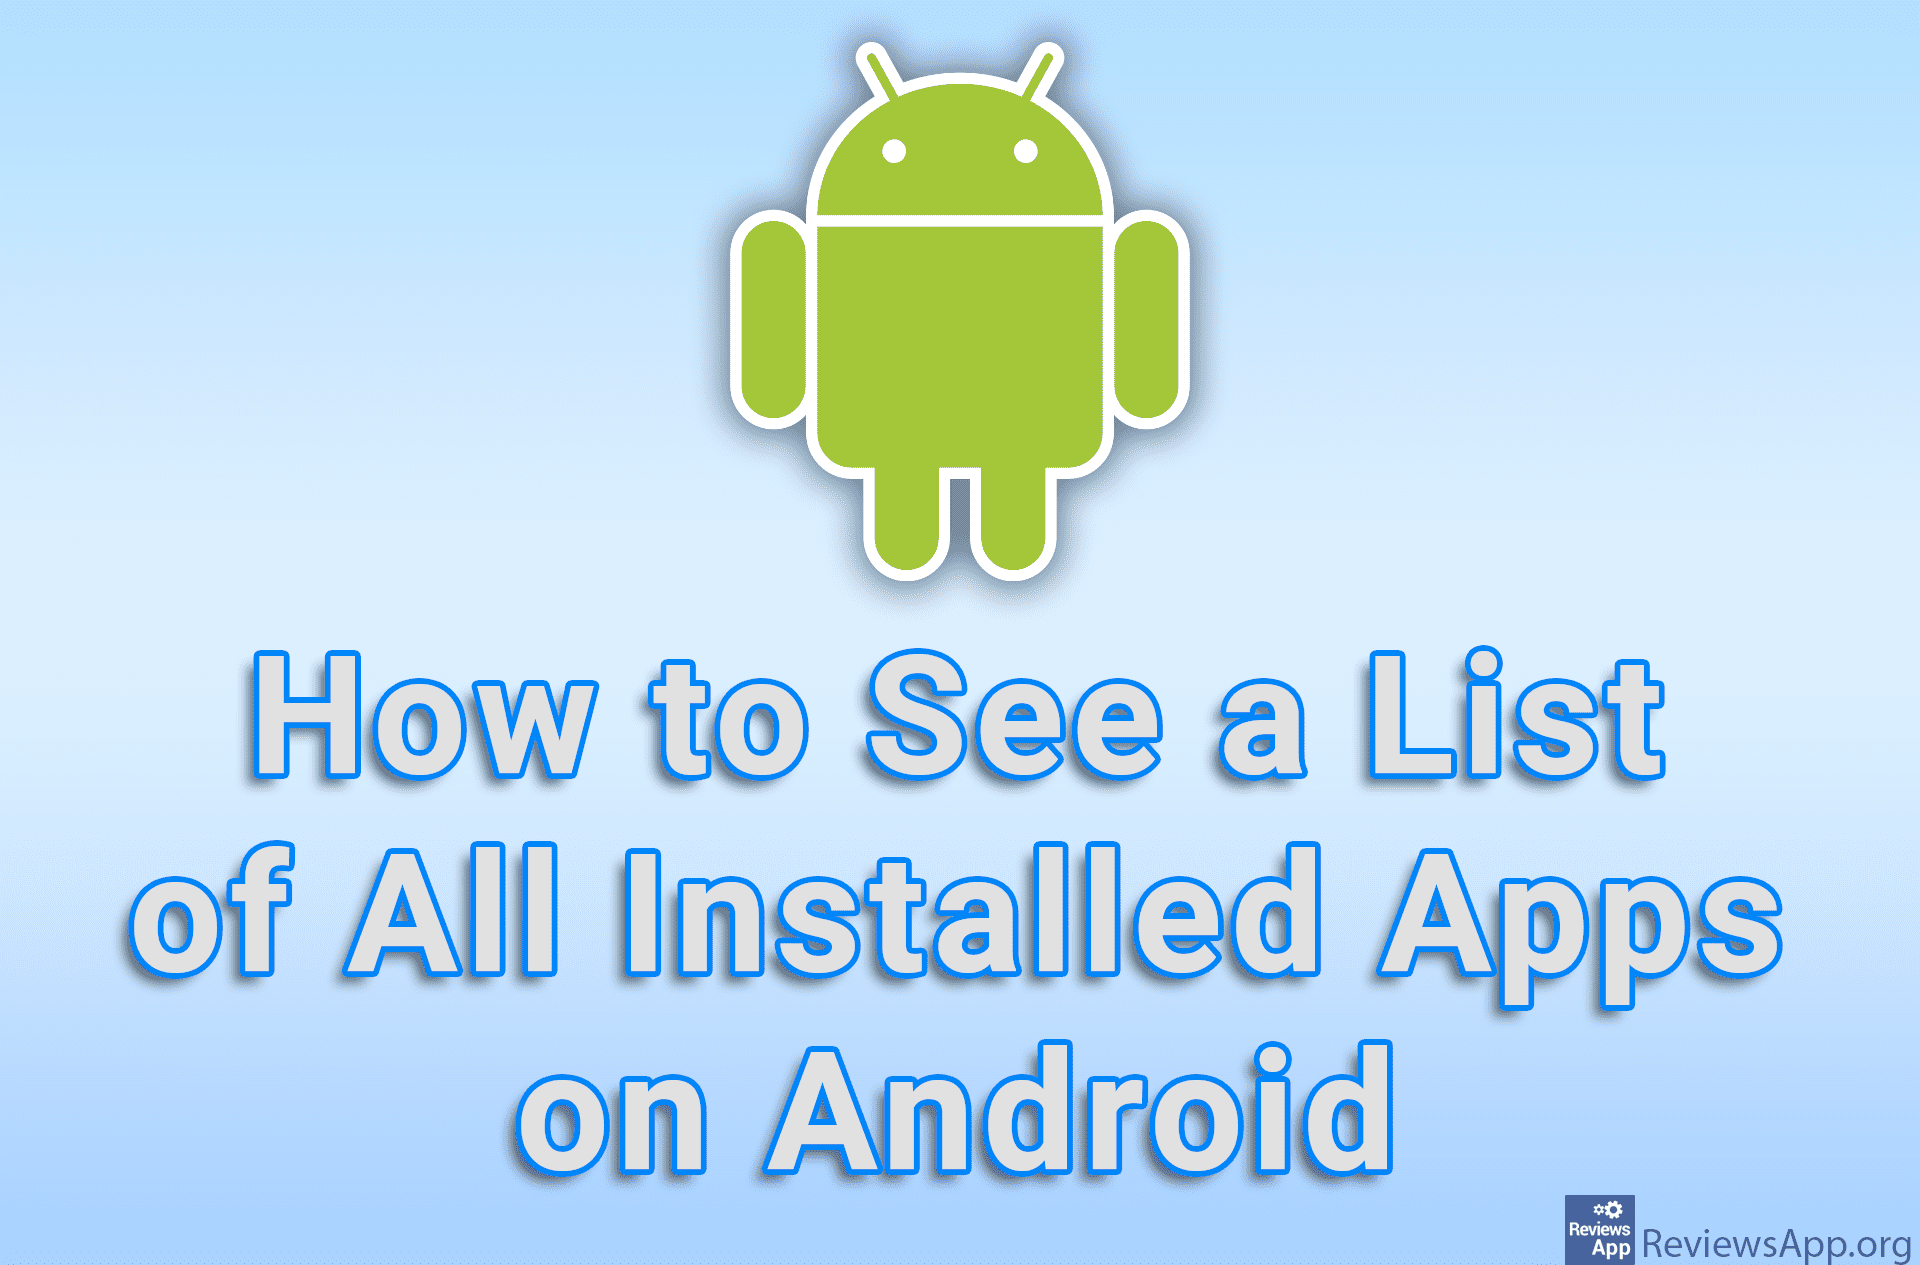 How to See a List of All Installed Apps on Android